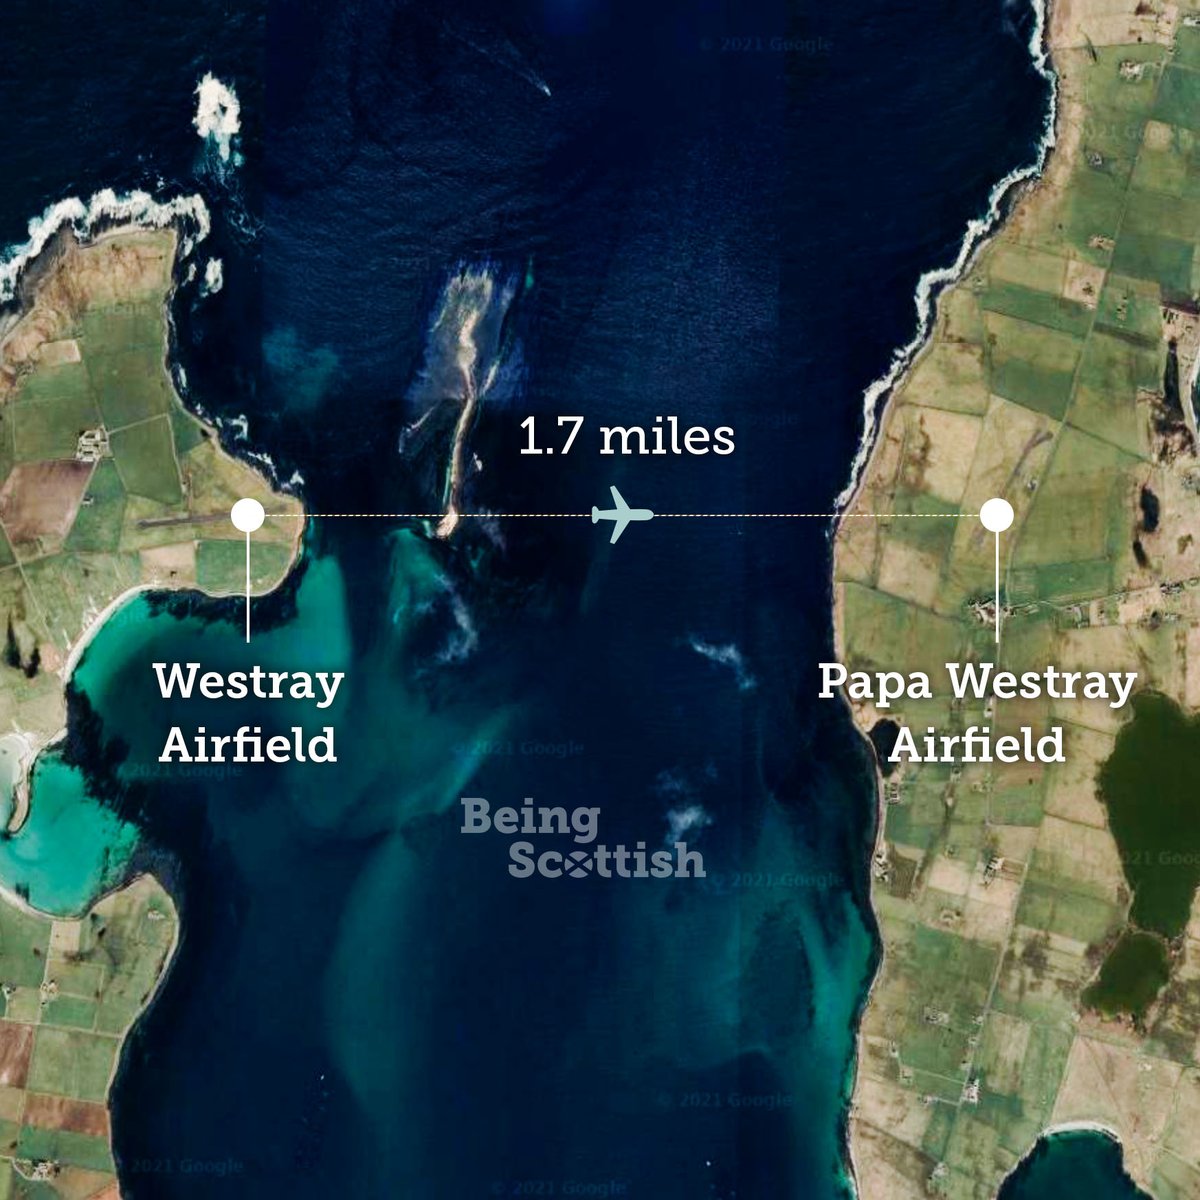 On this day in 1967: The world’s shortest commercial flight route started between two Orkney Islands, Westray and Papa Westray, north of the Scottish mainland. The Loganair flight covers a distance of only 1.7 miles and it can be completed in under one minute, on a clear day.